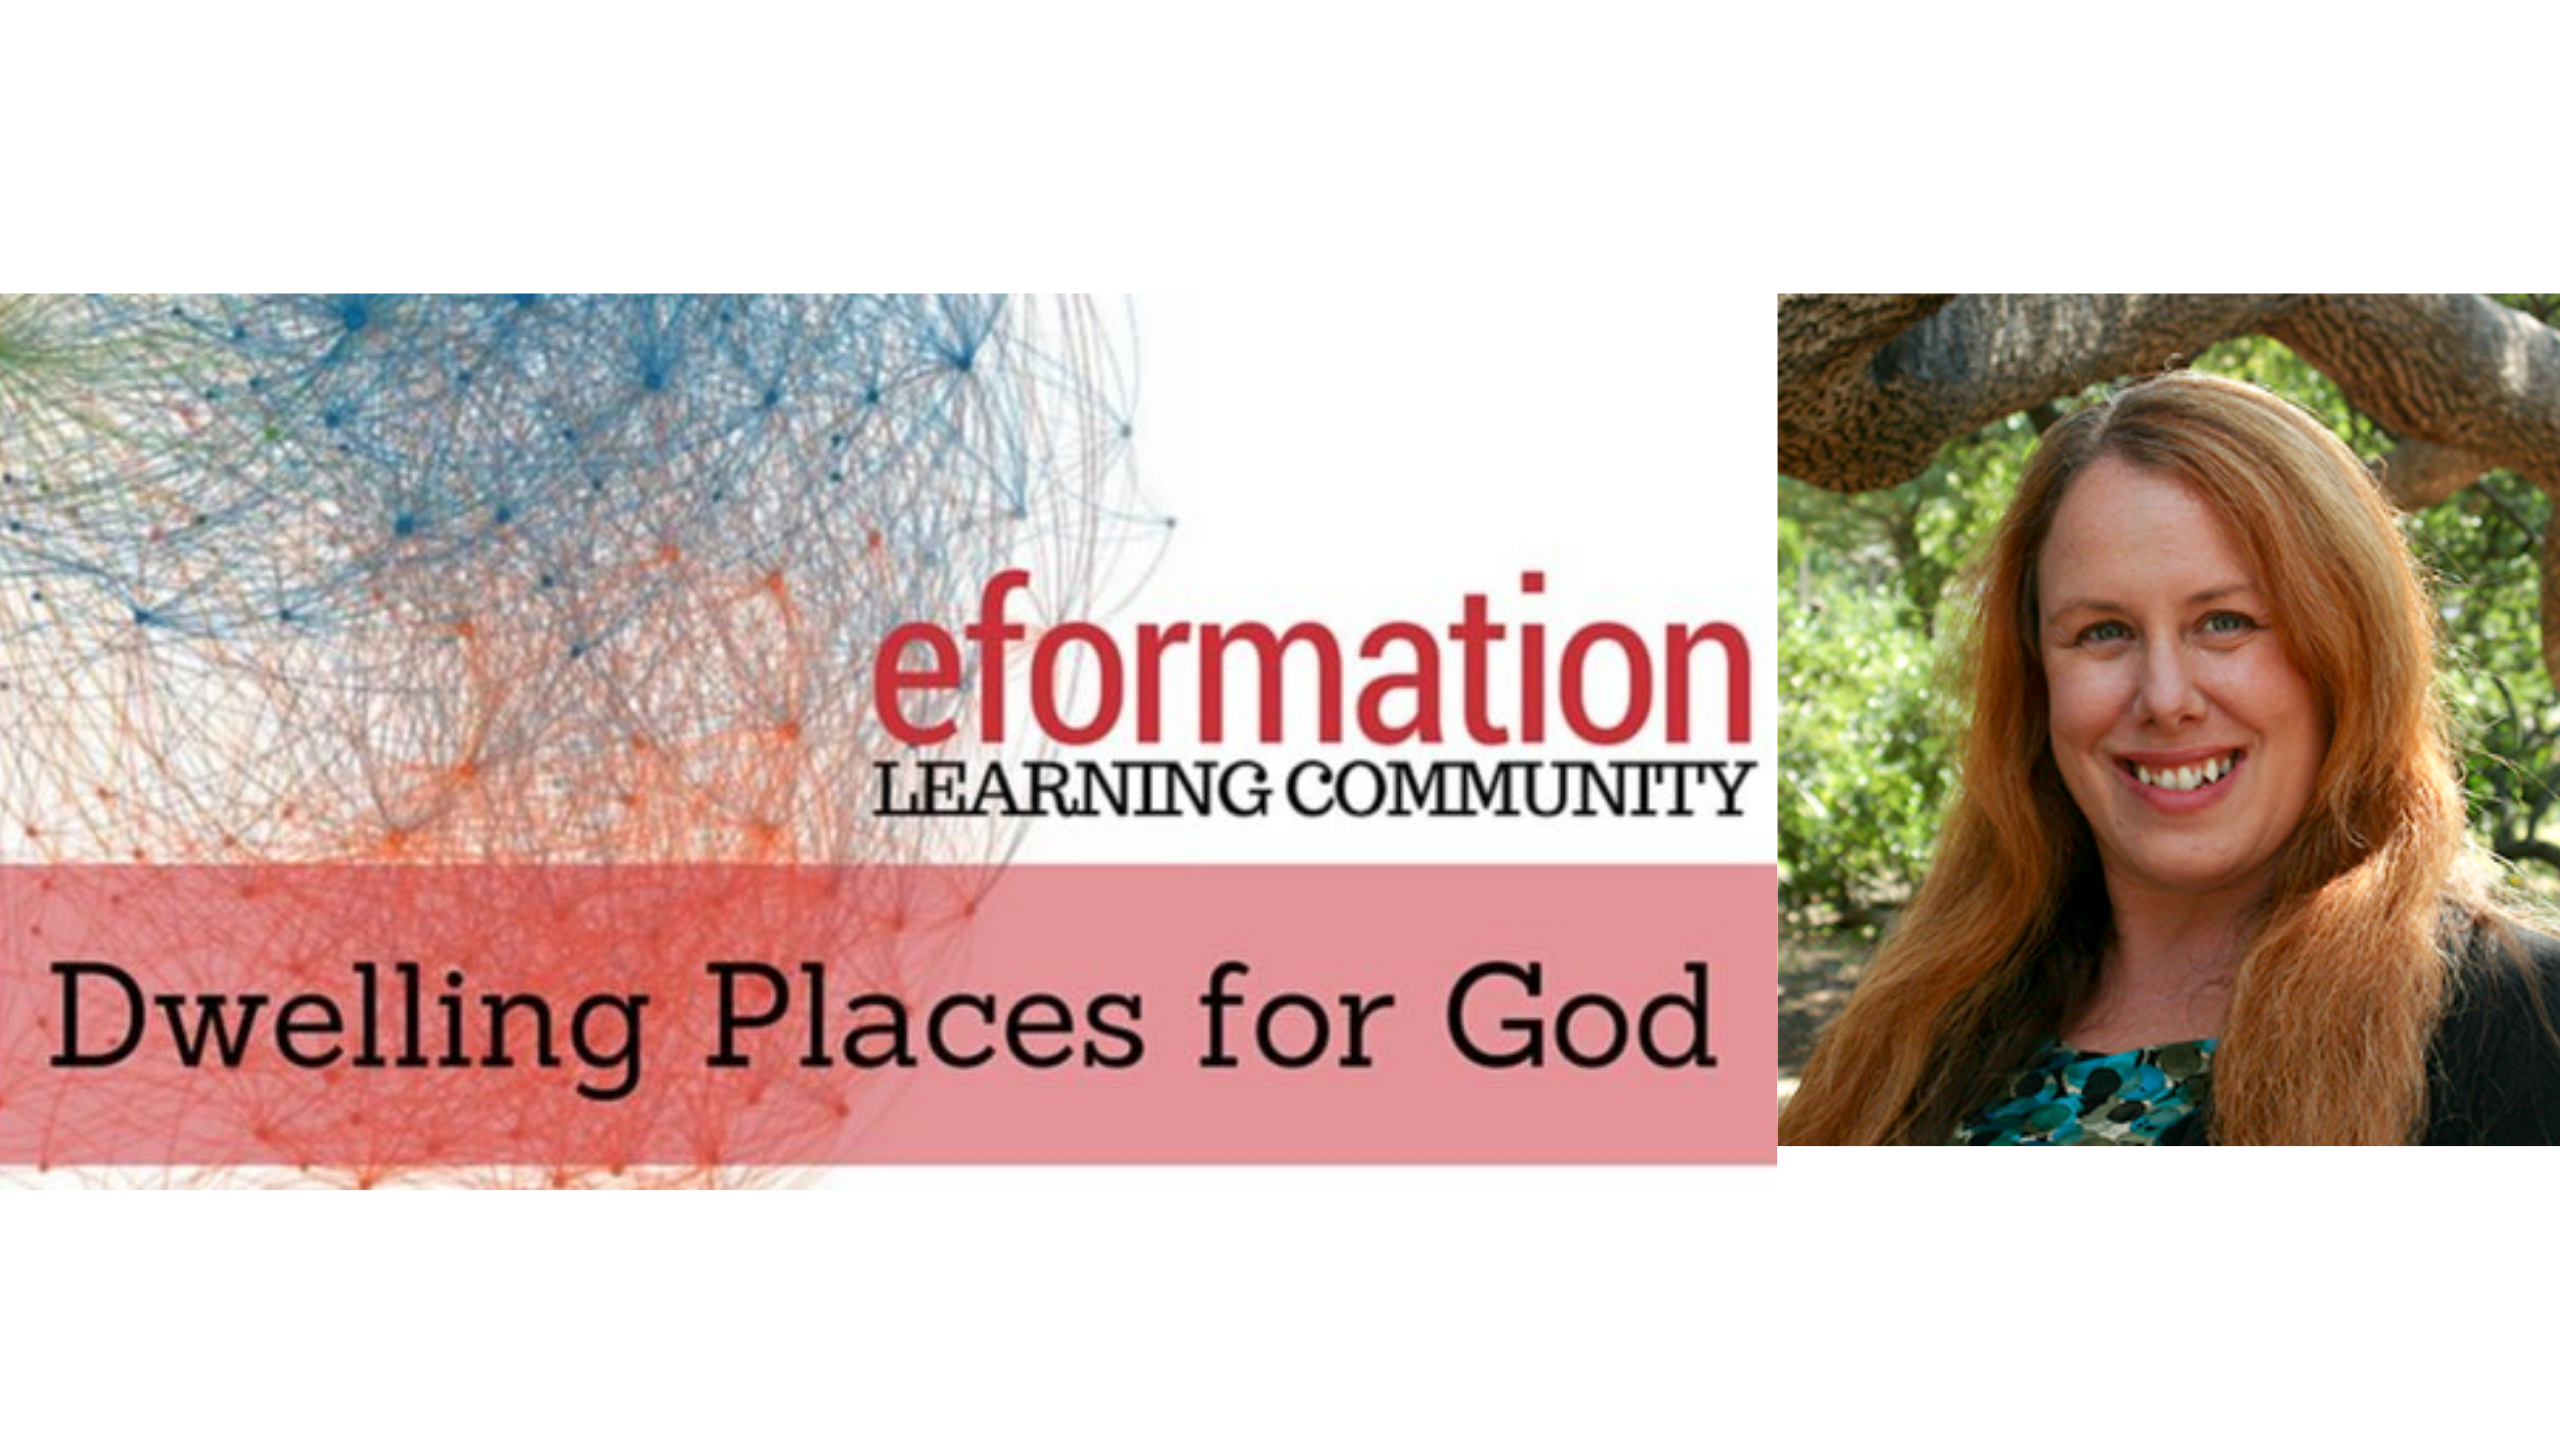 Dwelling Places for God